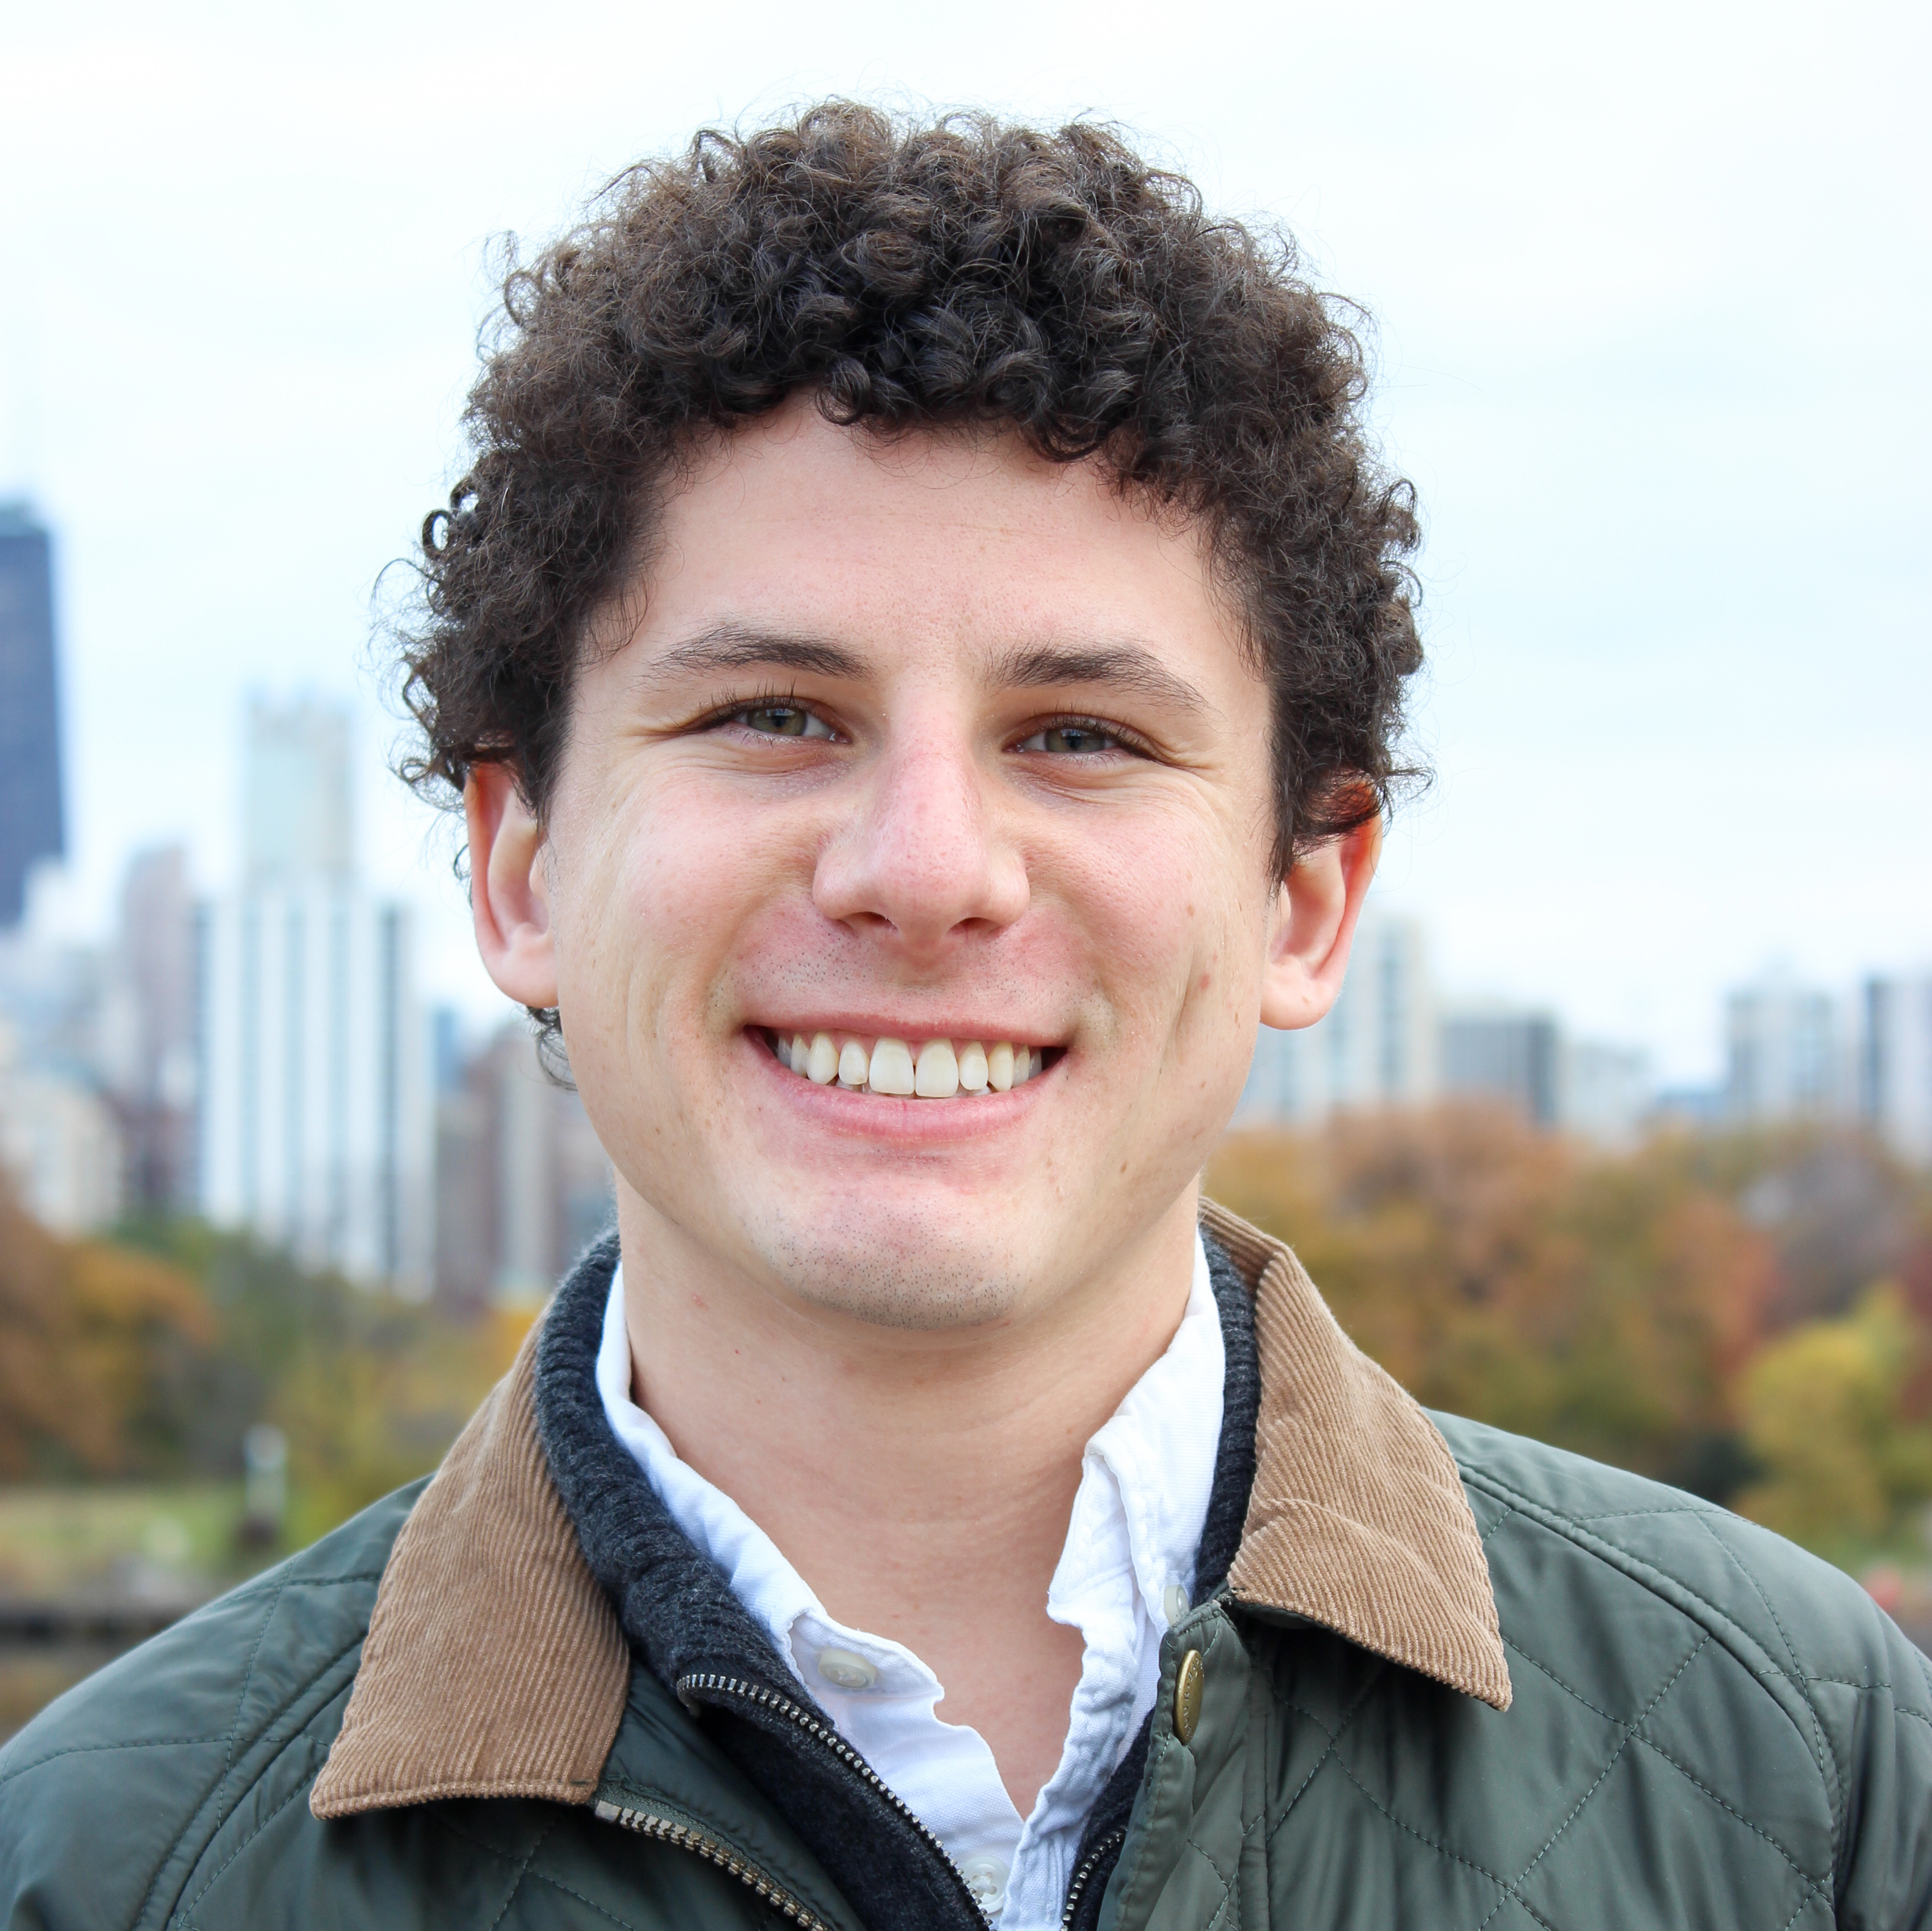 CodeHS Co-Founder: Zach Galant